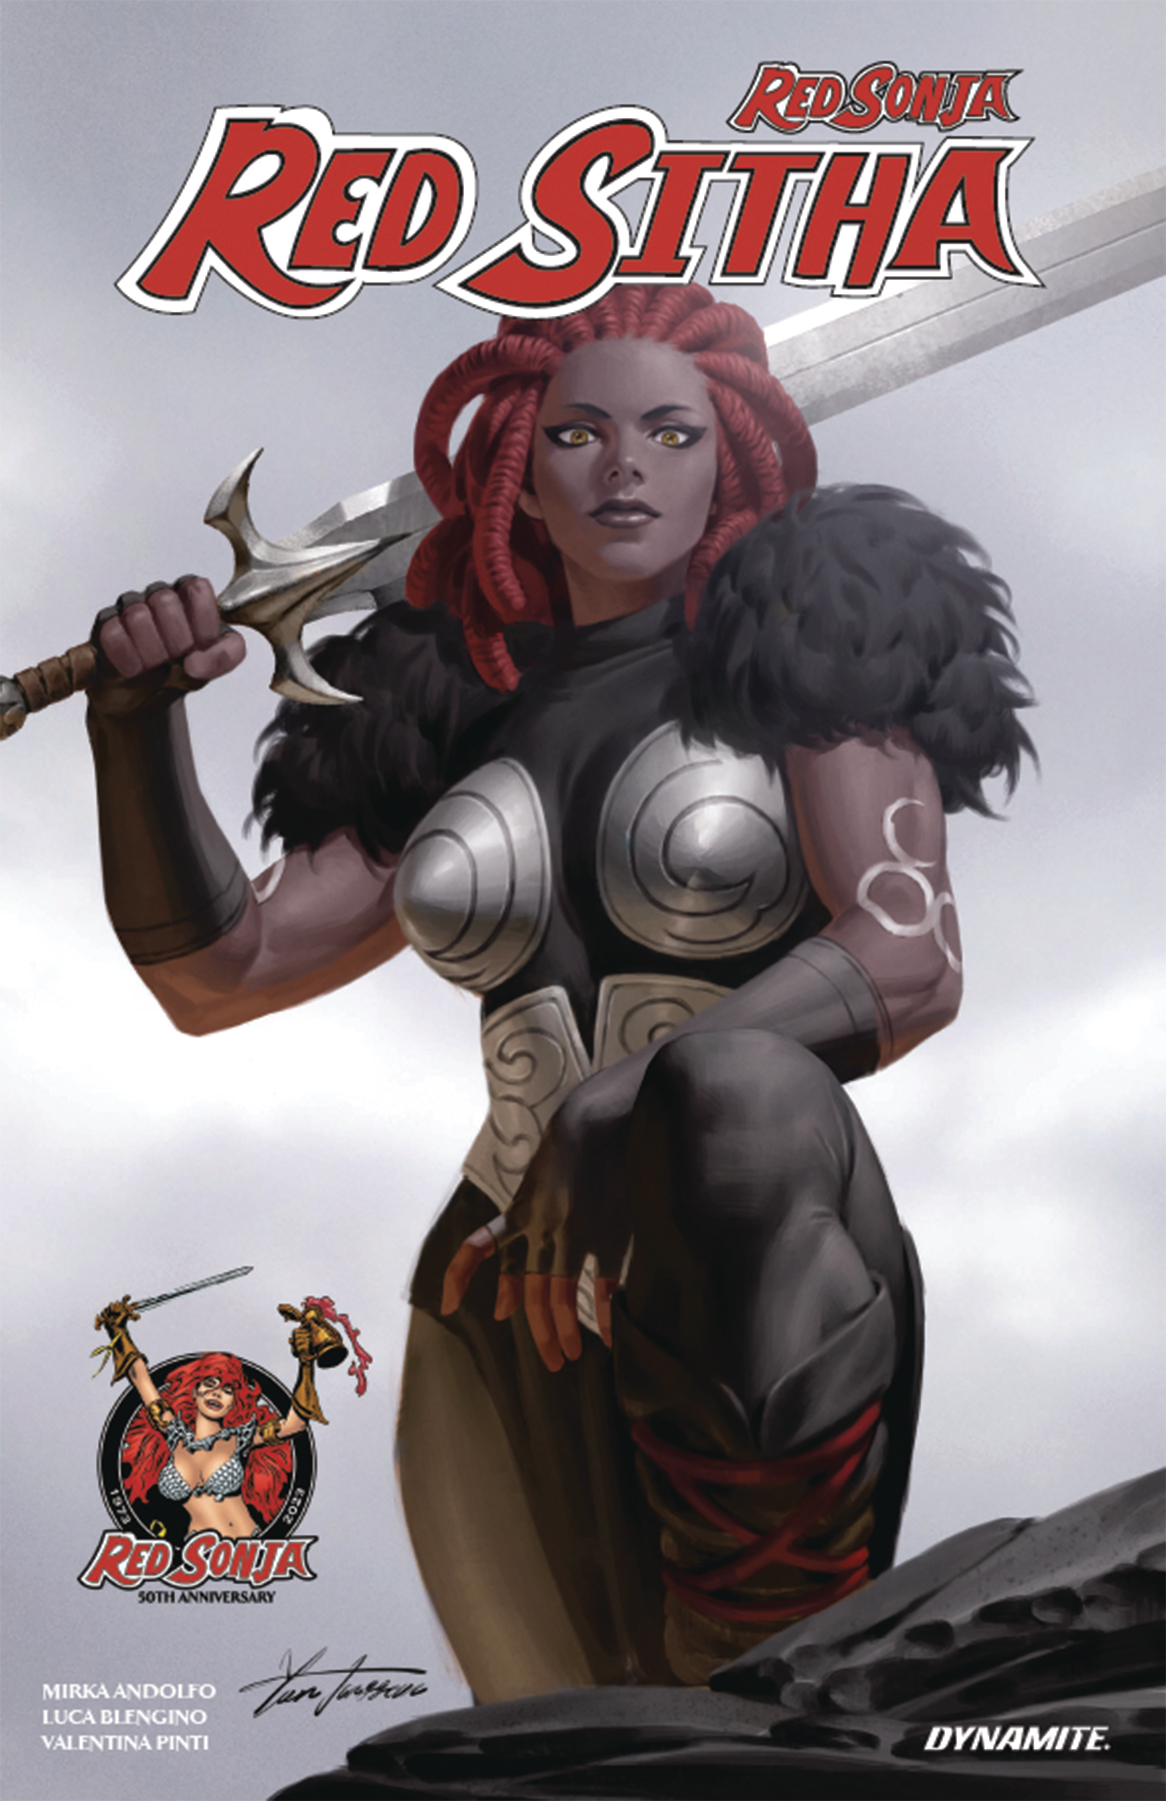 Red Sonja Red Sitha Graphic Novel